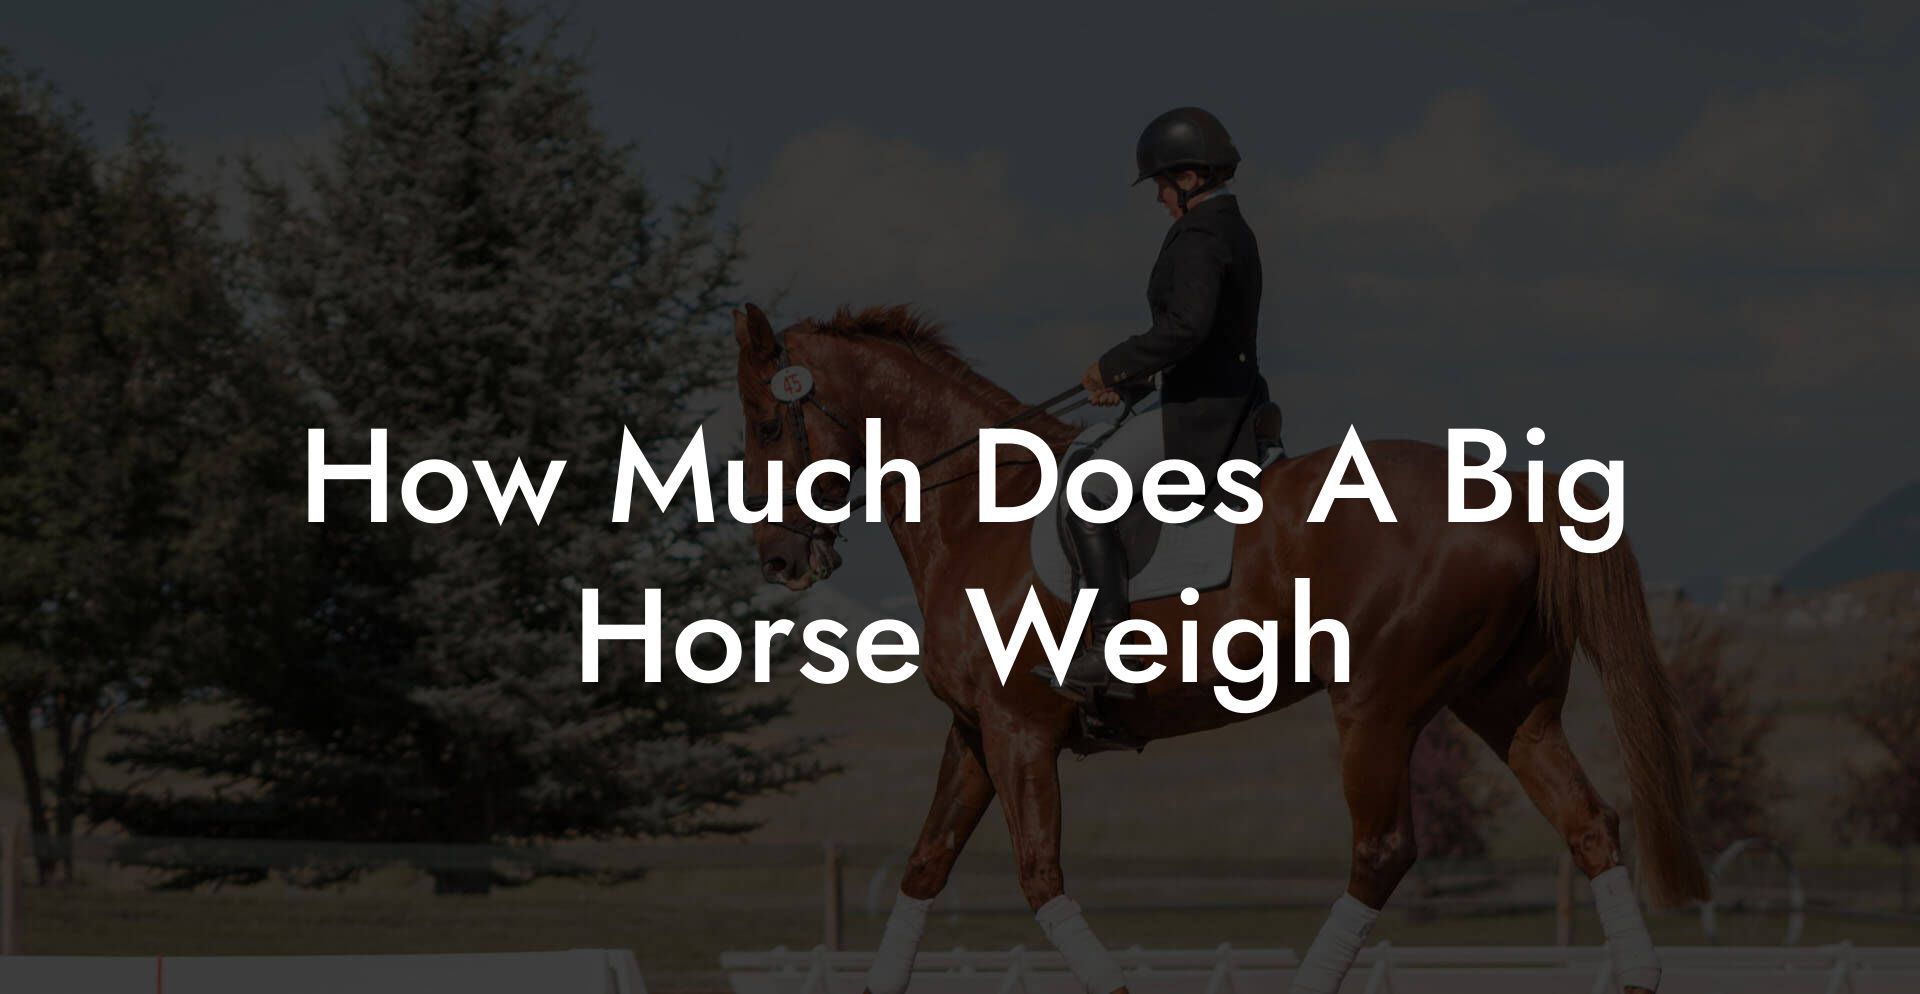 How Much Does A Big Horse Weigh